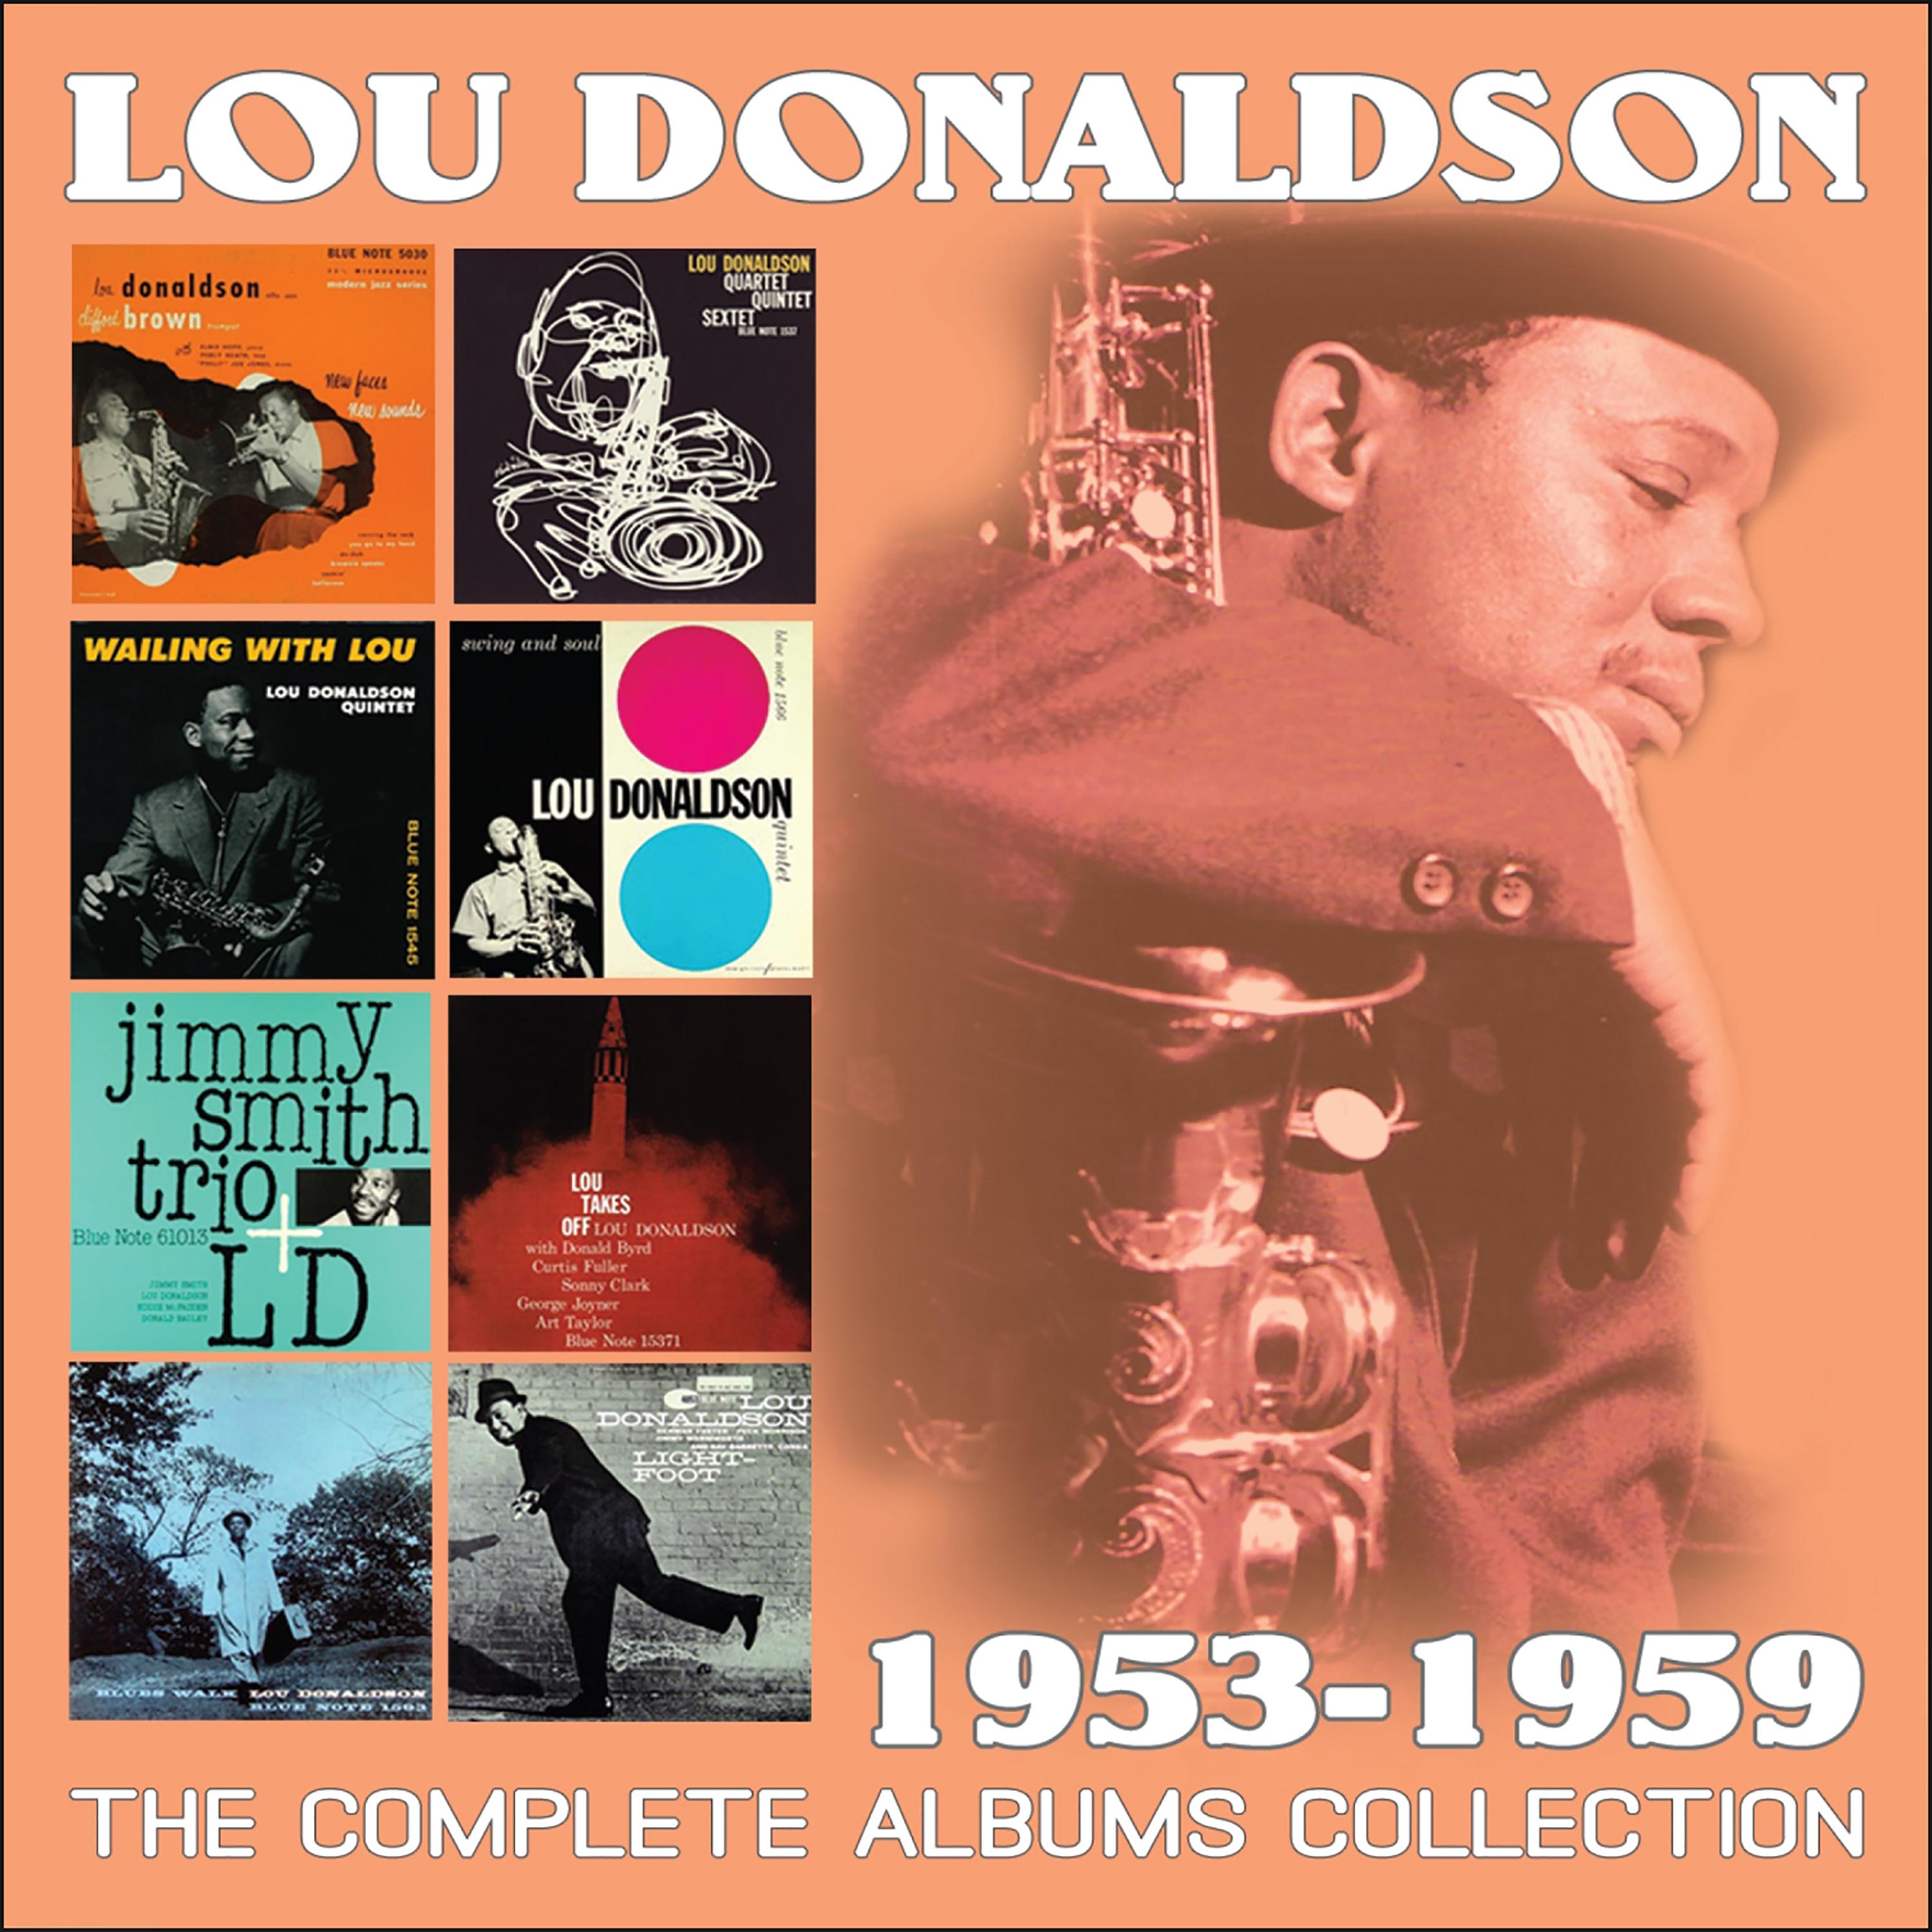 The Complete Albums Collection: 1953 - 1959